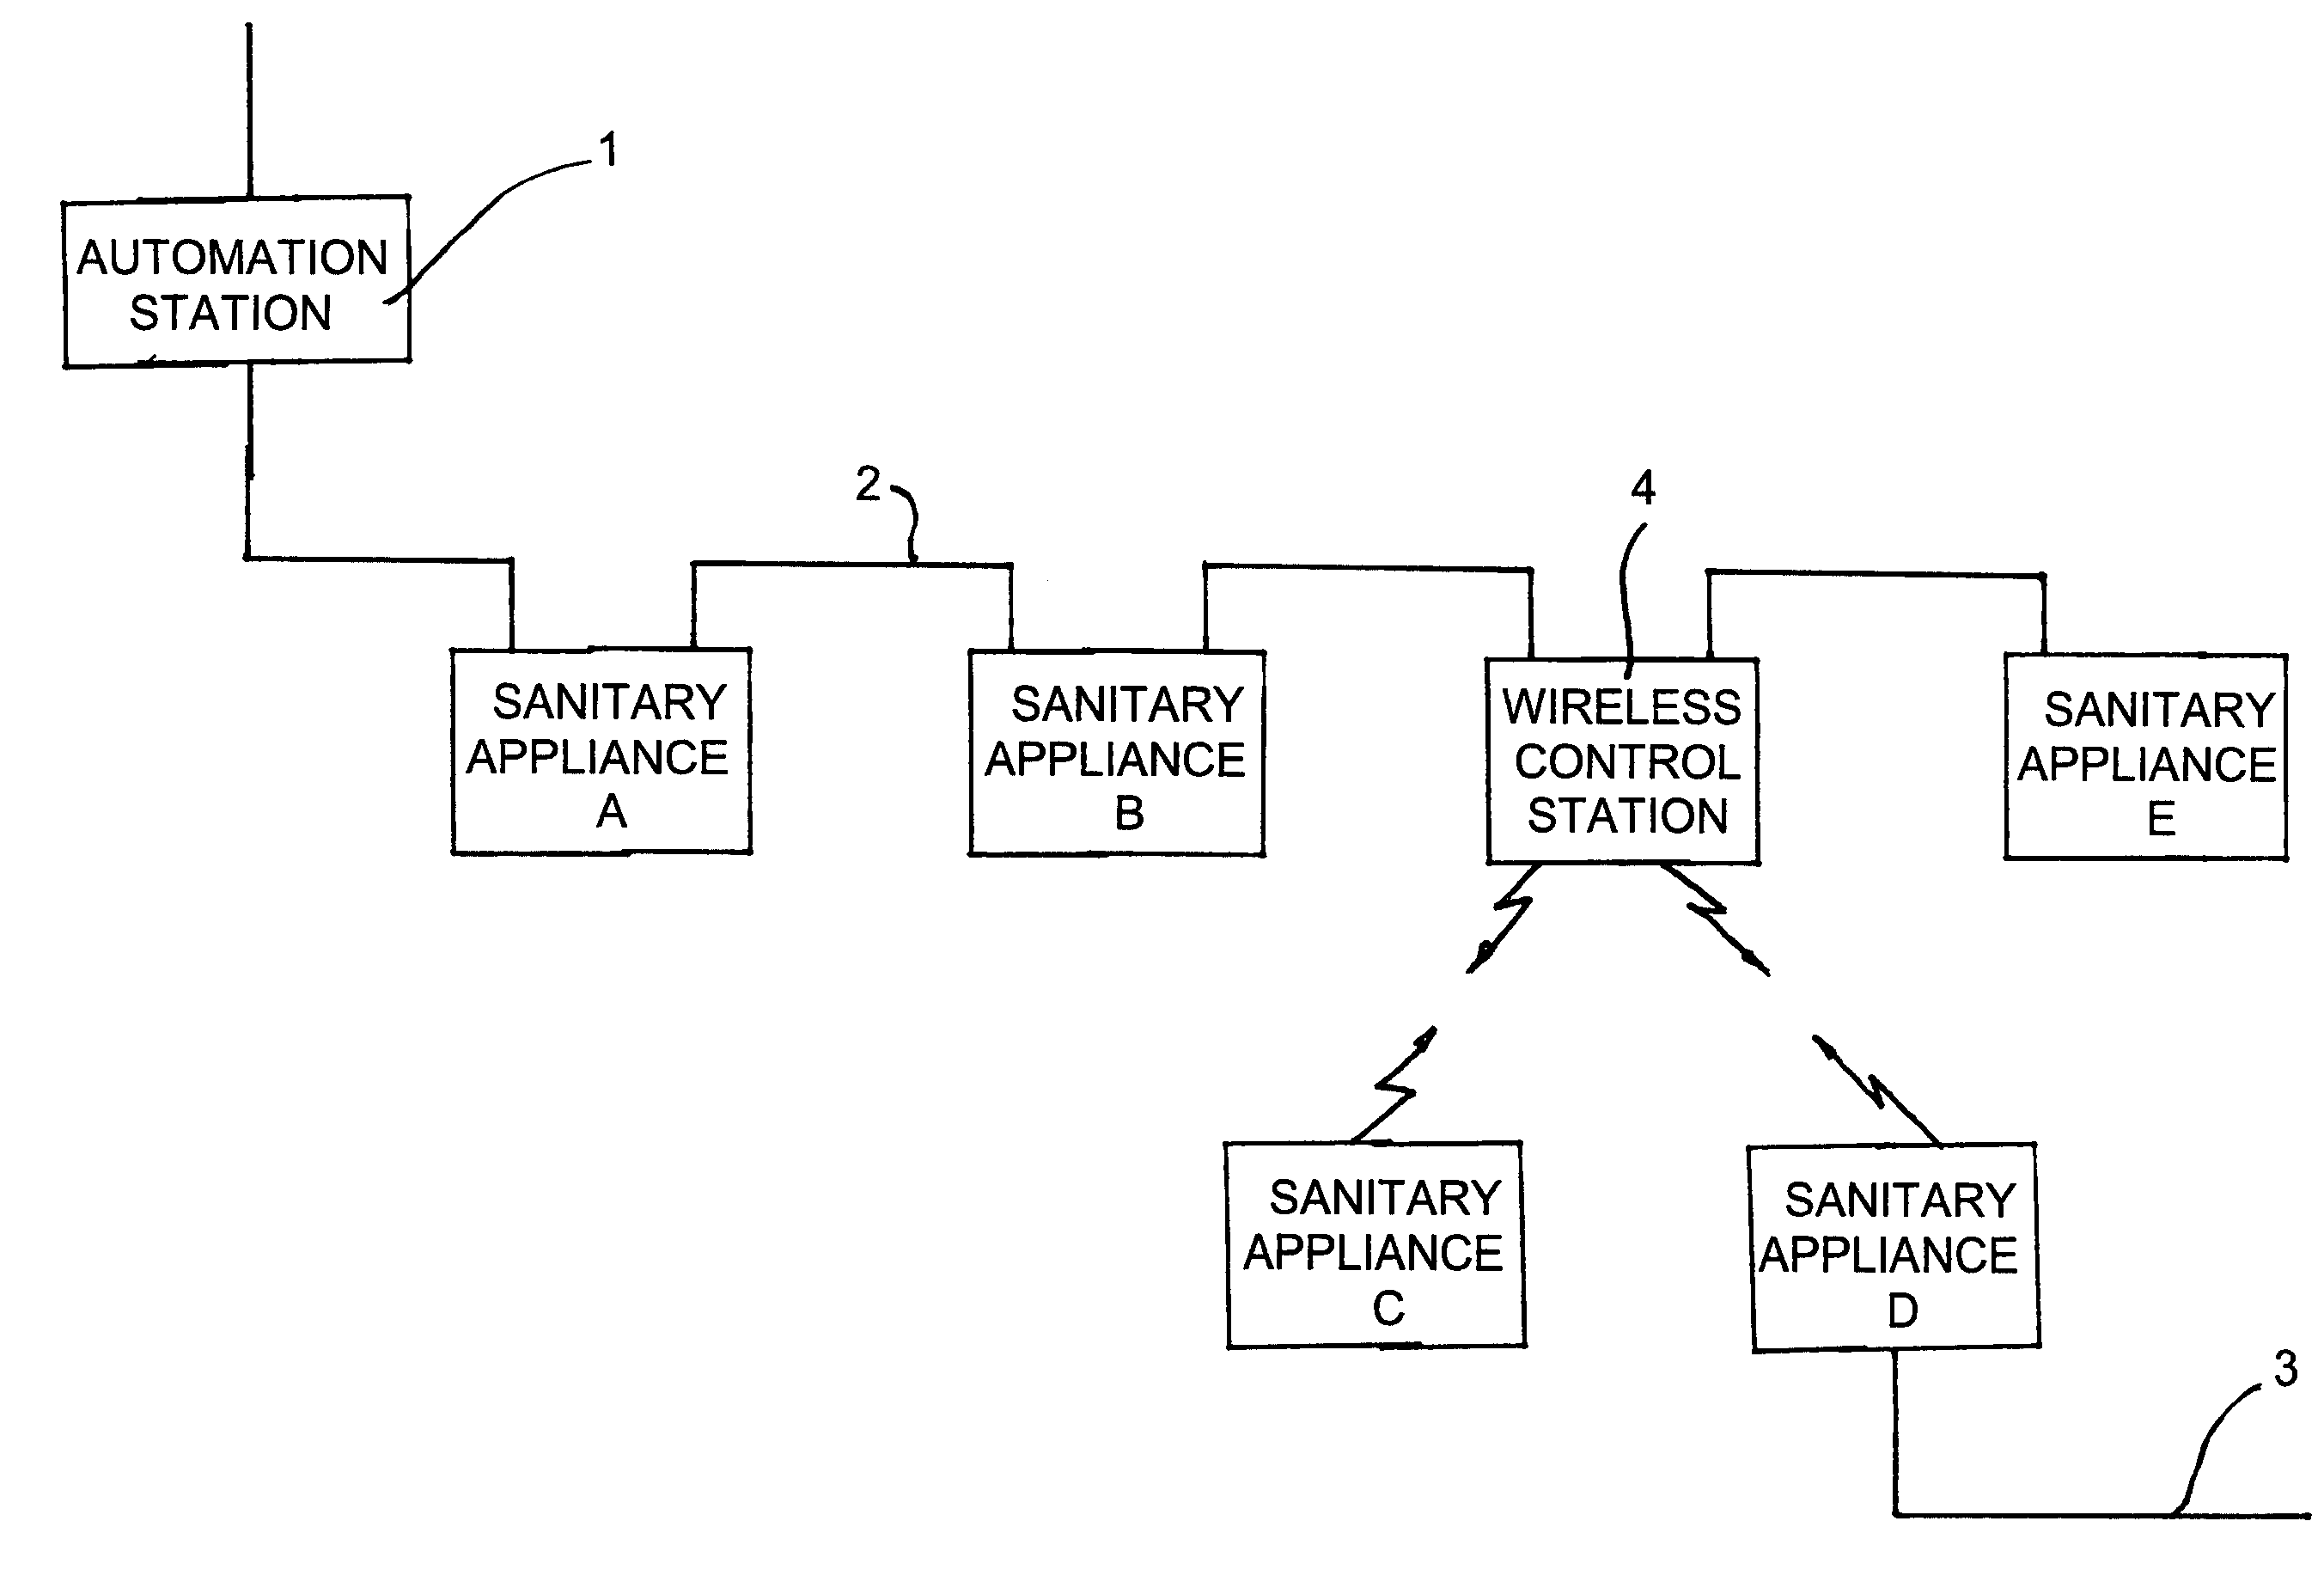 System for the control and monitoring of sanitary appliances